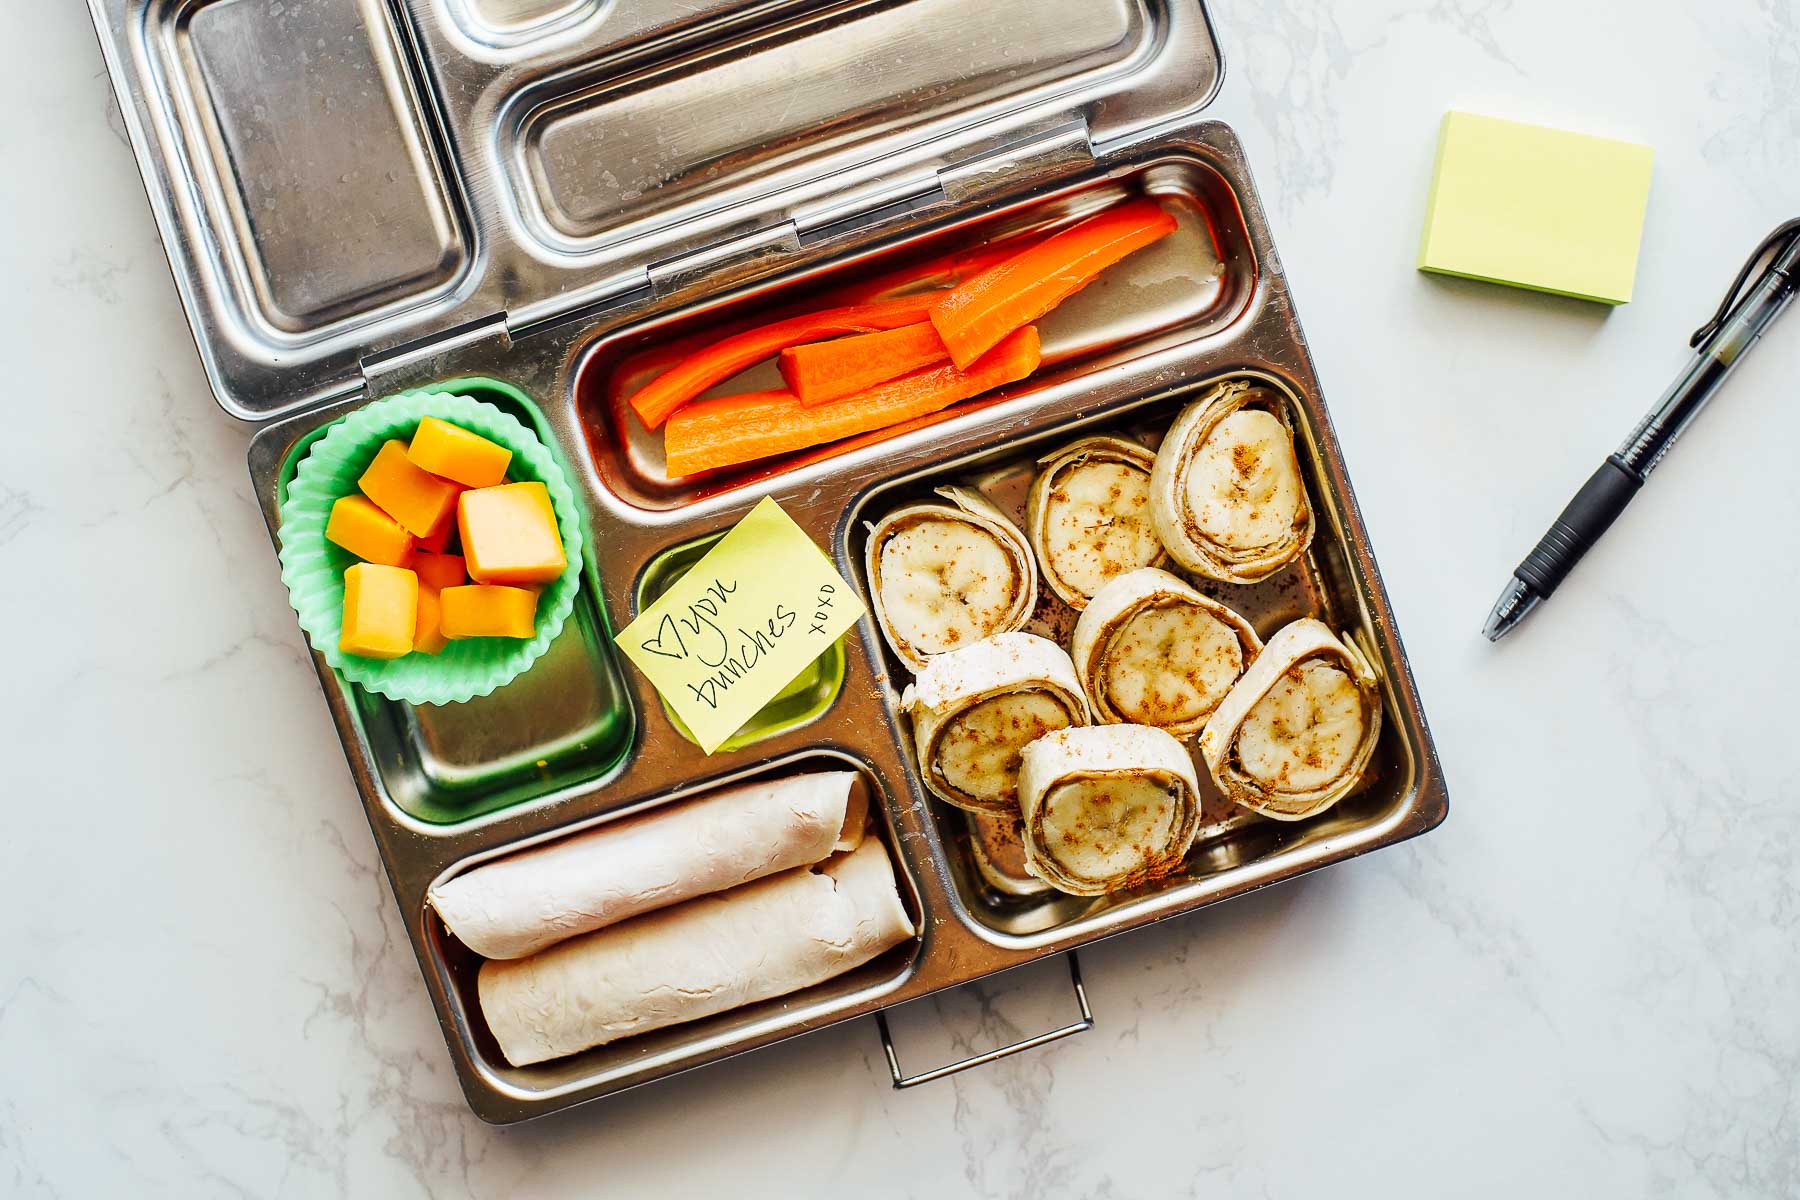 Banana sushi rolls, turkey rolled up, cheese cubes, and roasted carrots in a lunchbox.